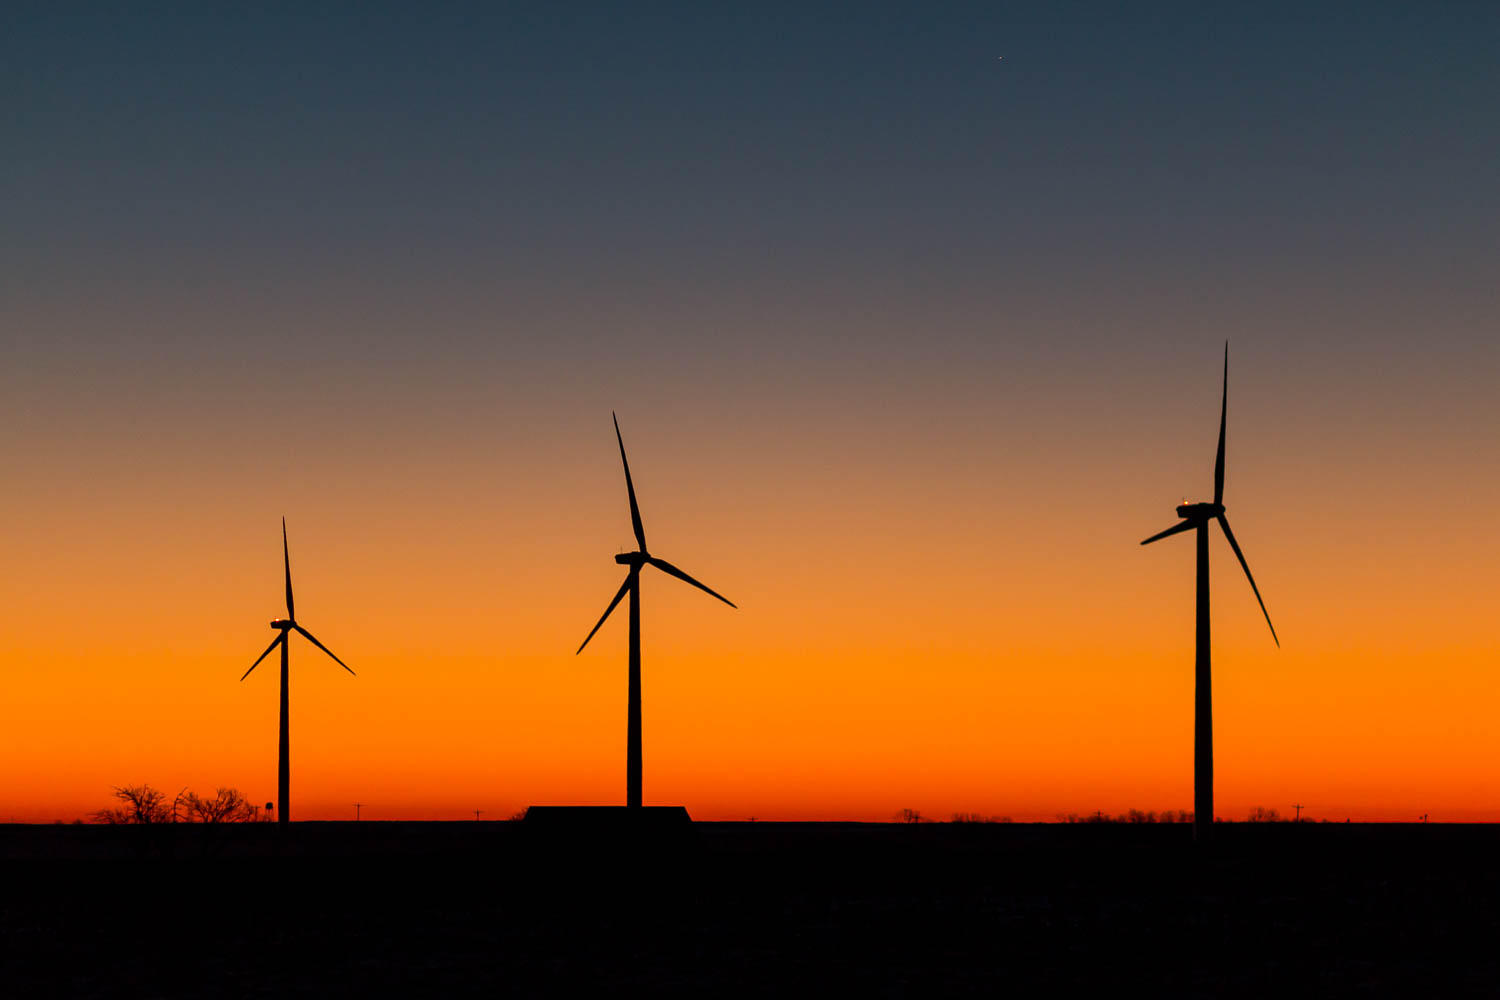 Kansas Makes Good Use Of Wind Power, But Other Renewables